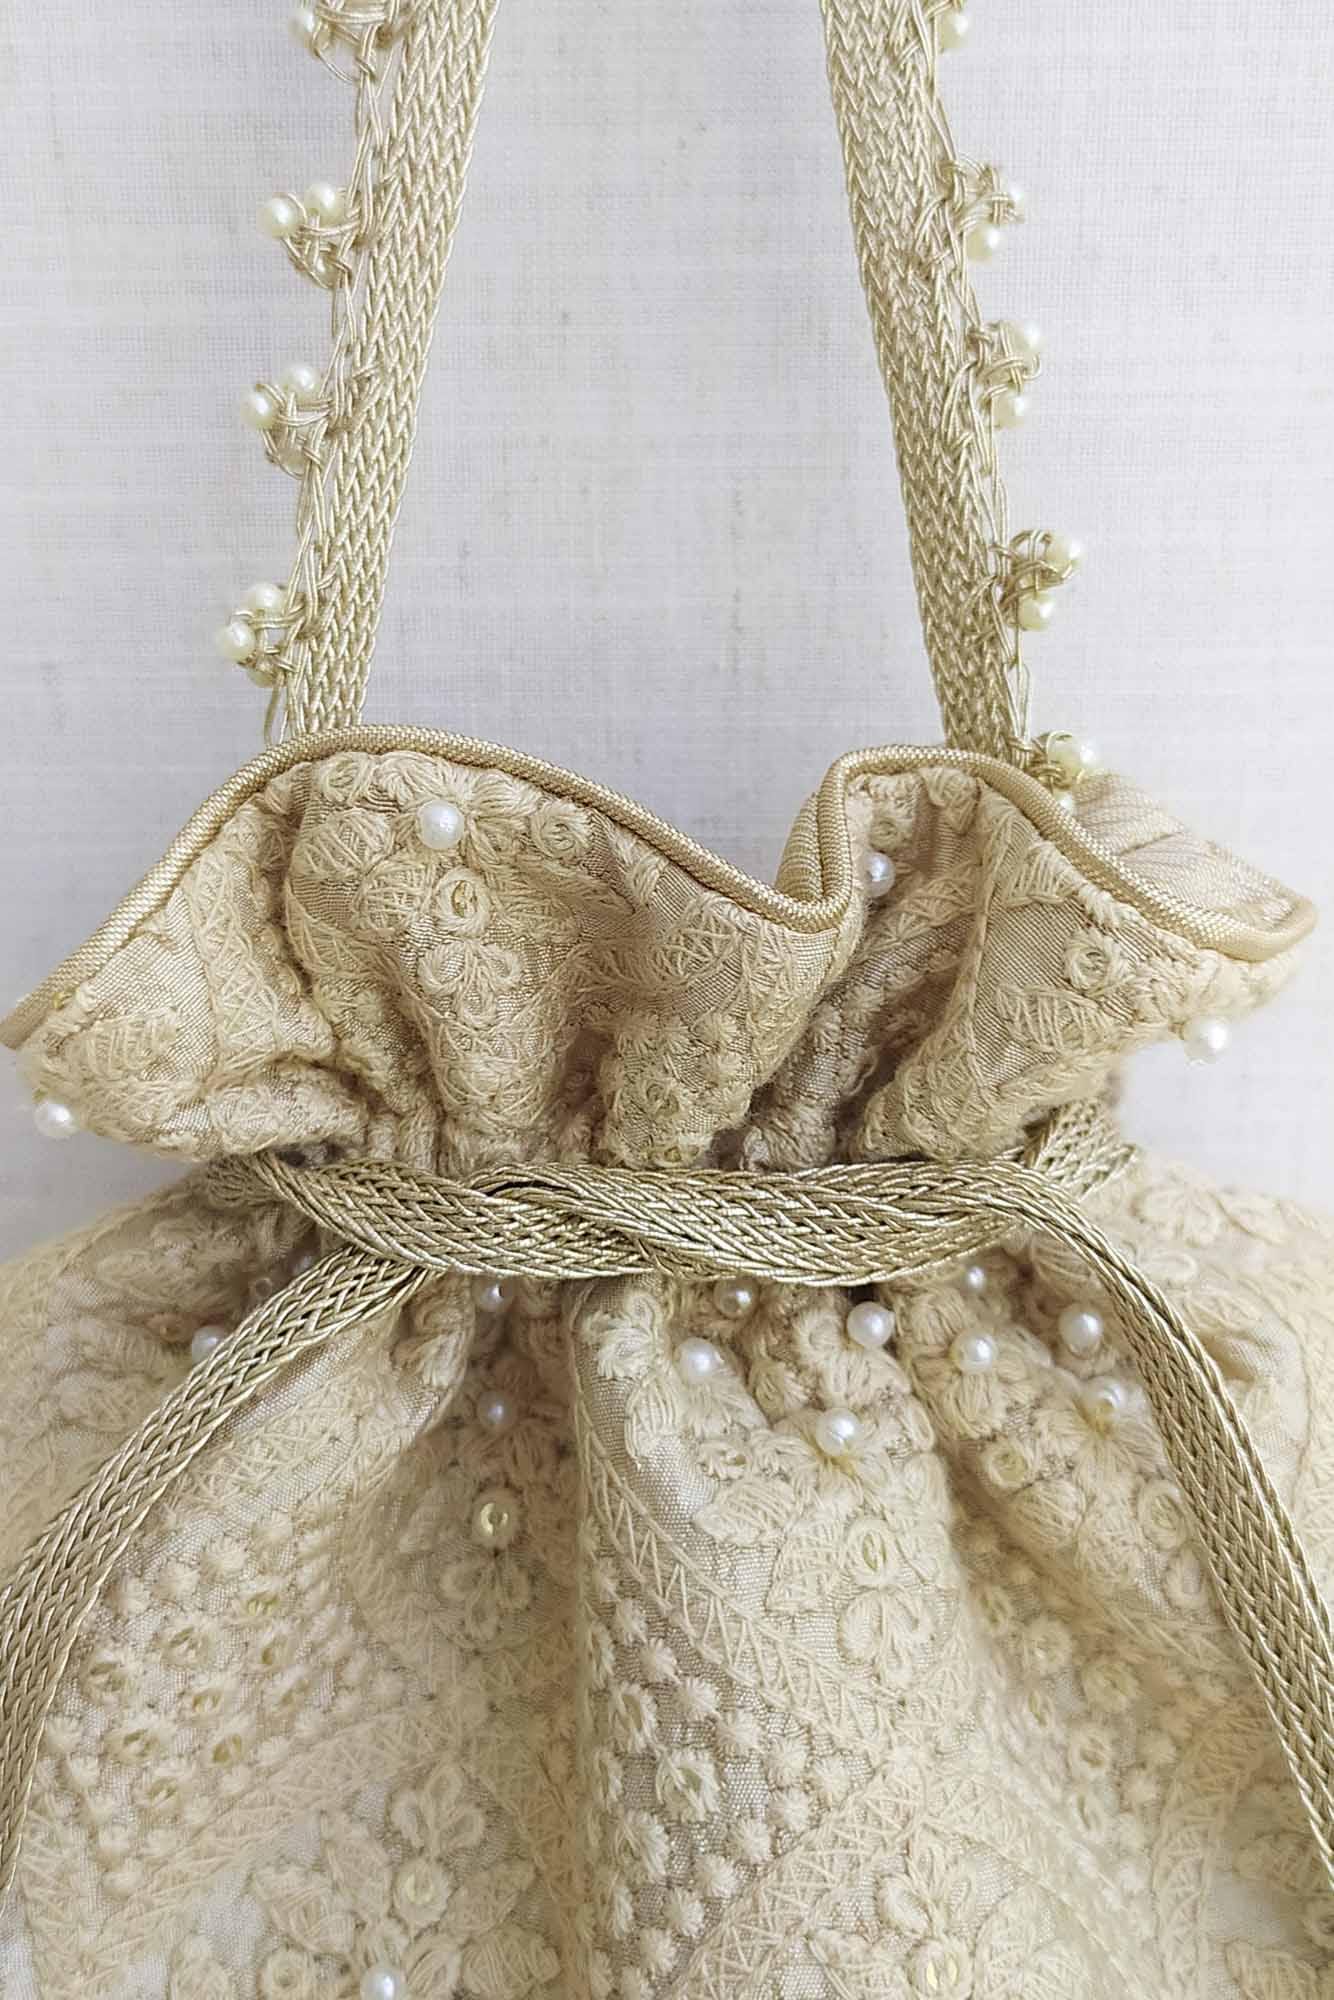 AMYRA Oyster Beige Pearl Embroidered Silk Potli bag